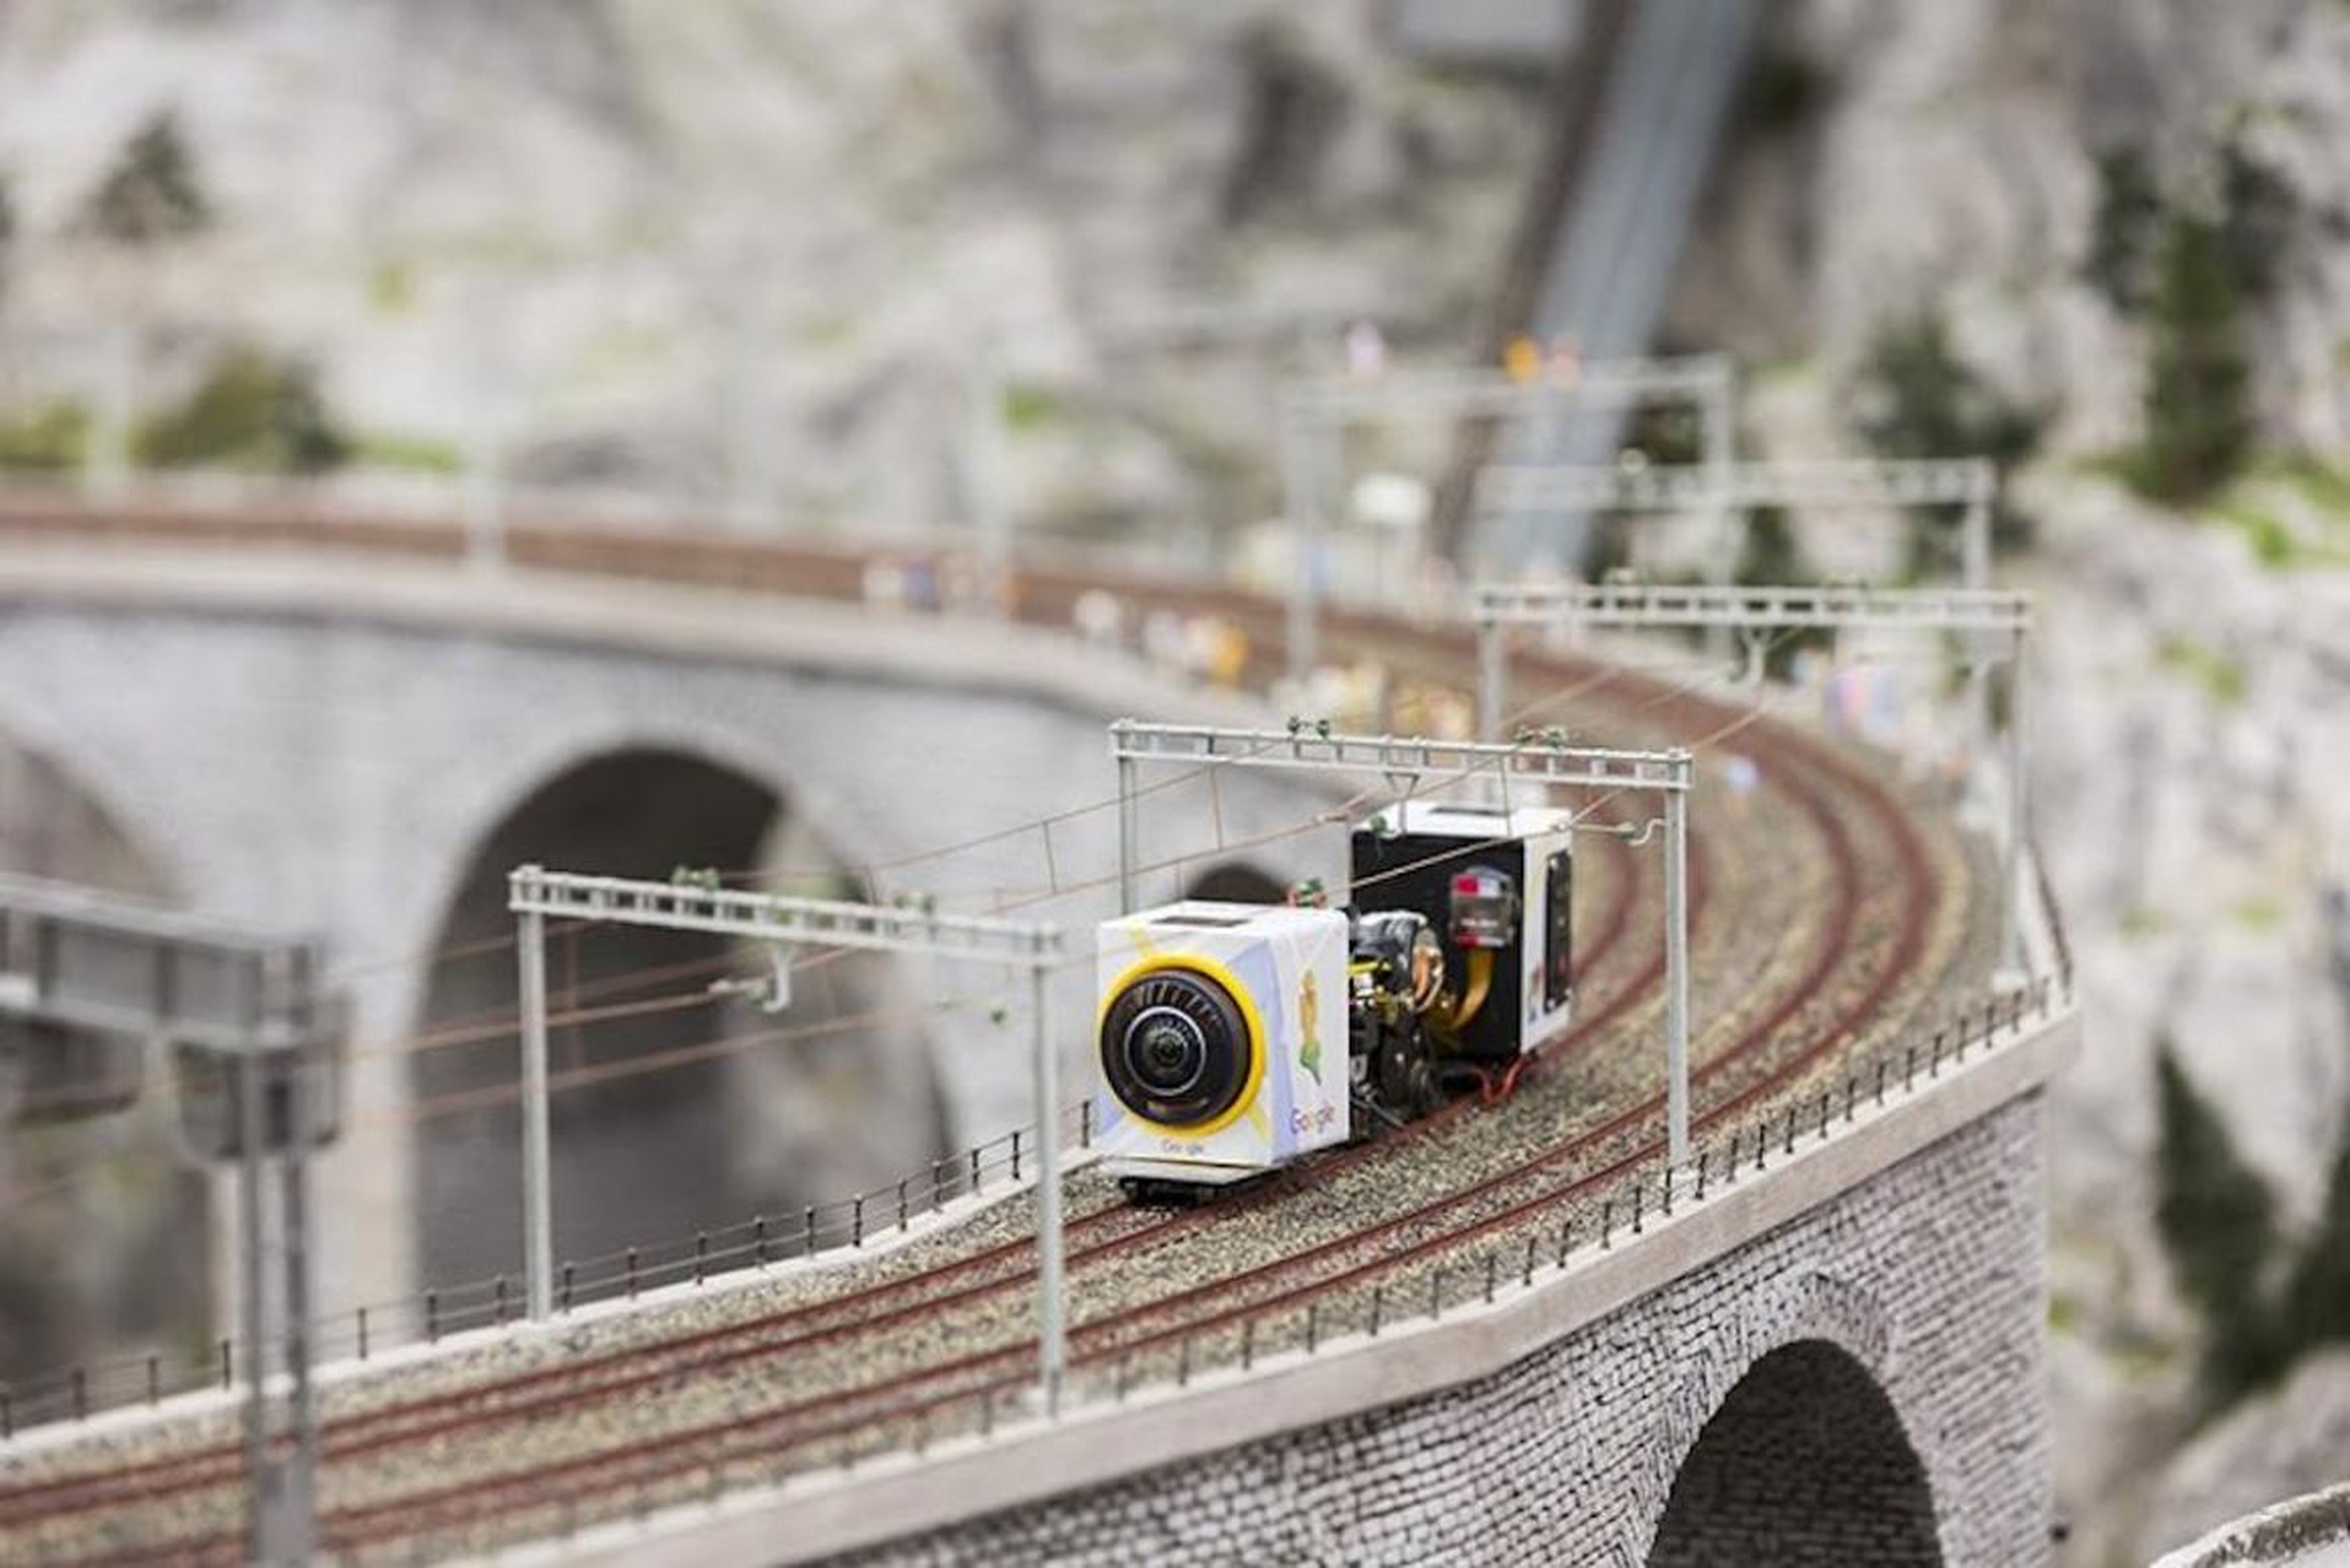 ... and railways of Miniatur Wunderland. Keep in mind, this model railway features over 8 miles of track.